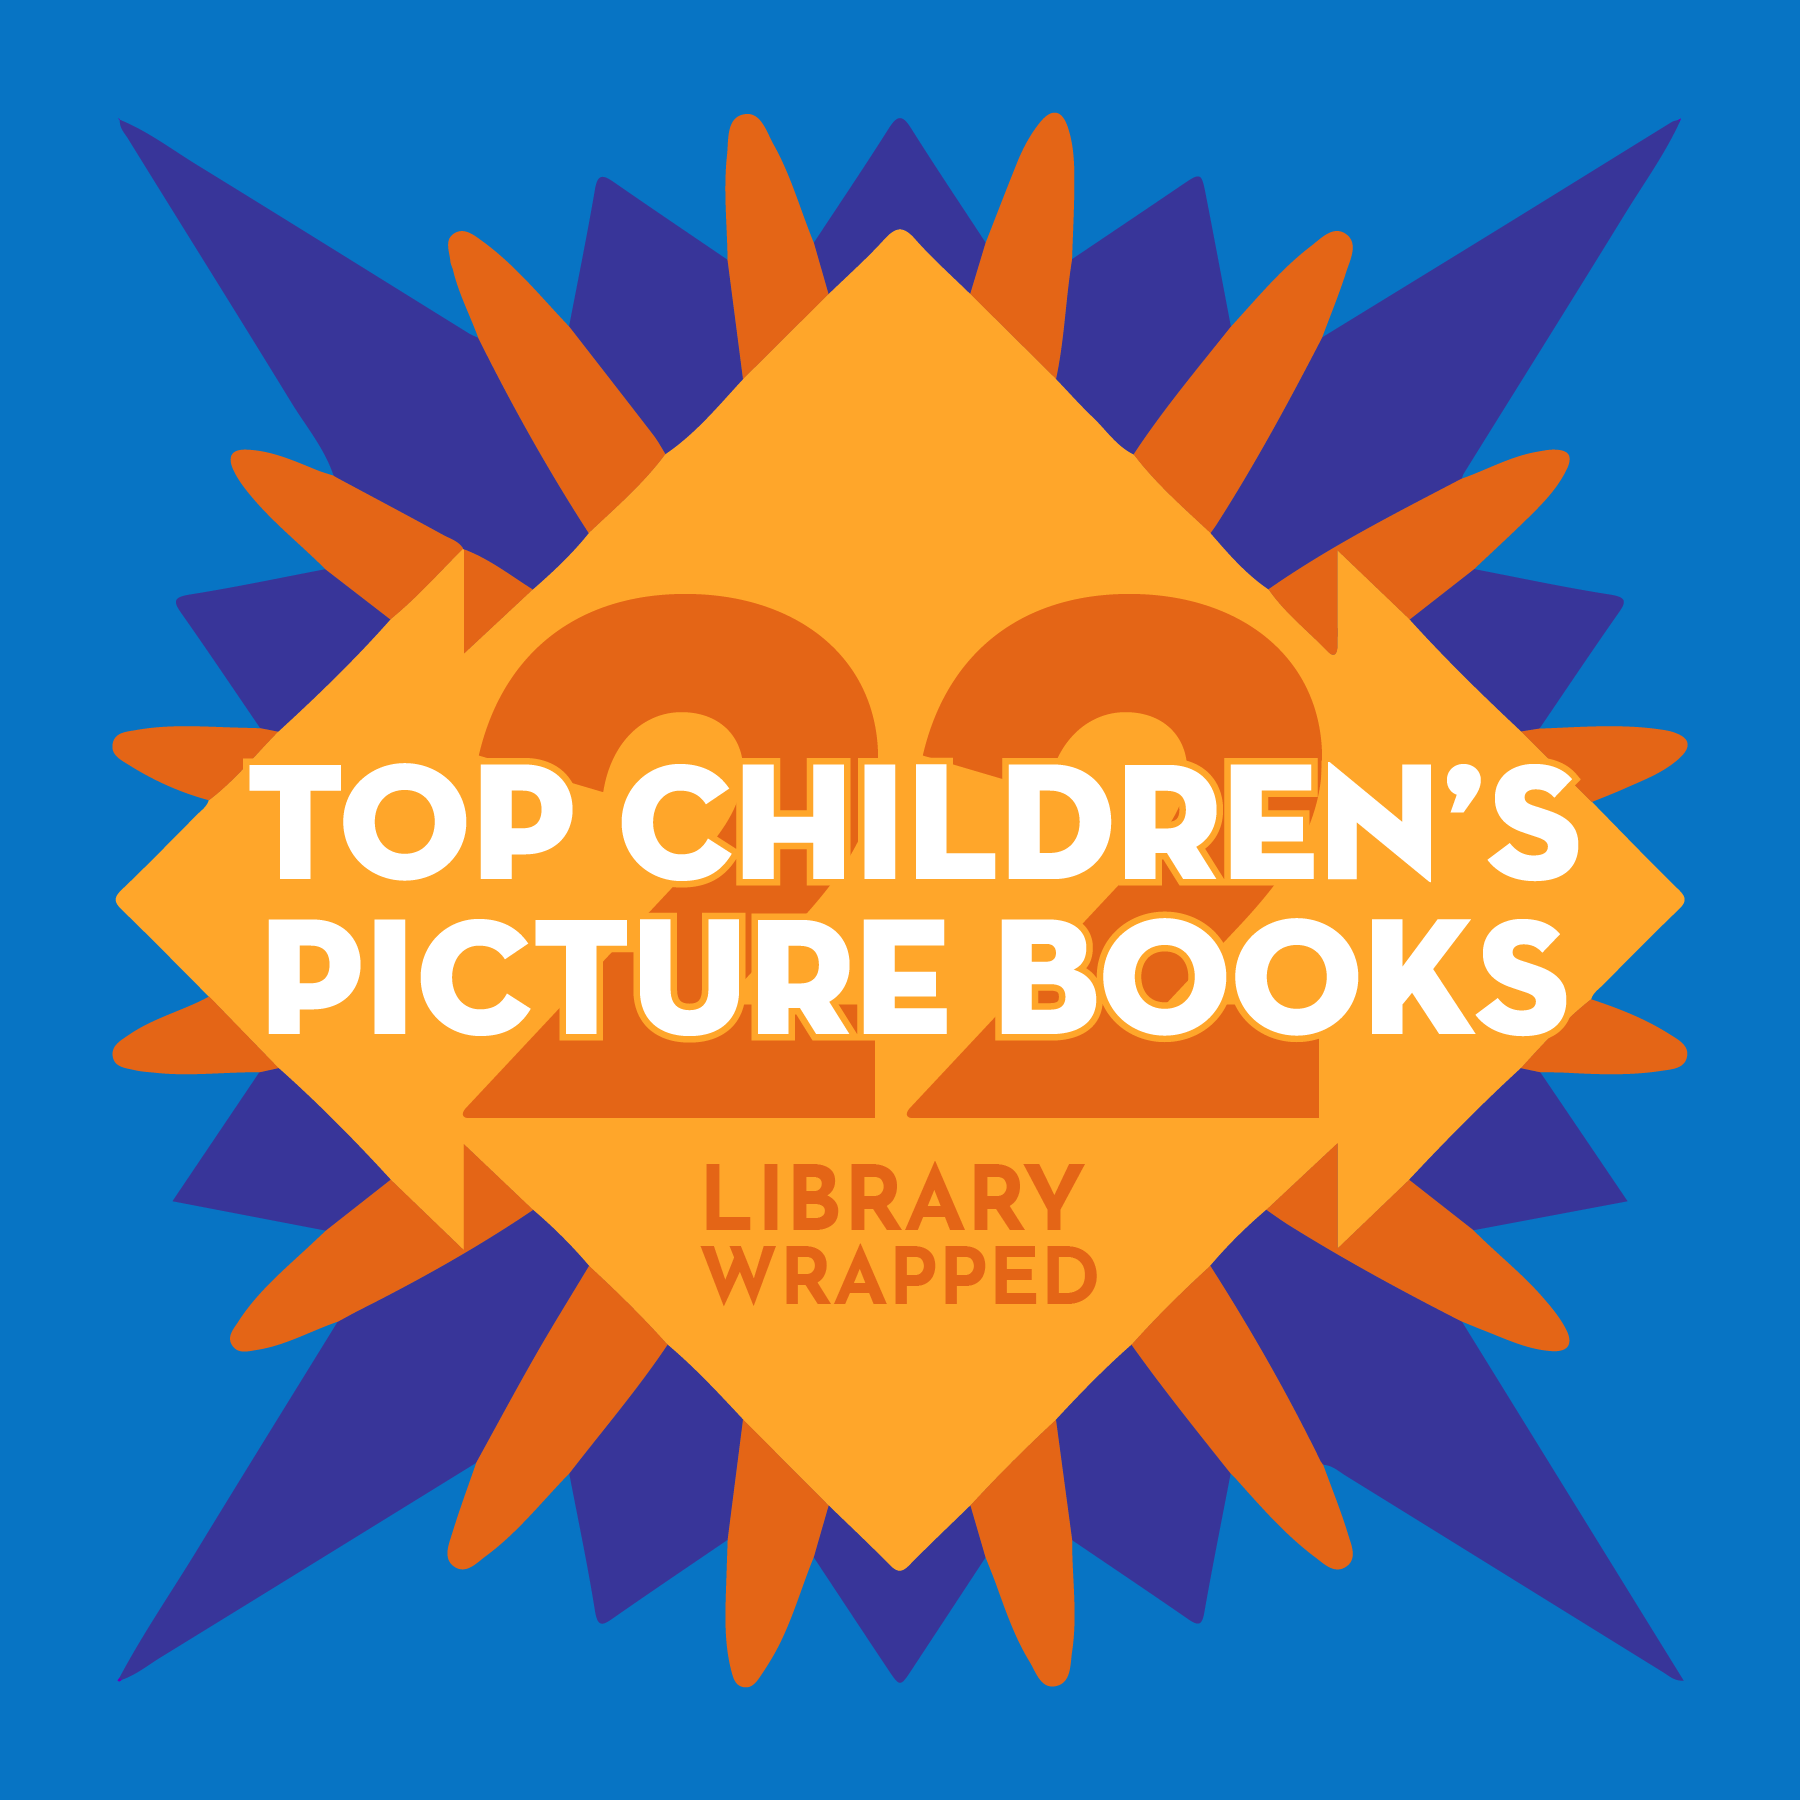 A graphic says 22 Library Wrapped Top Children's Picture Books over a blue background.